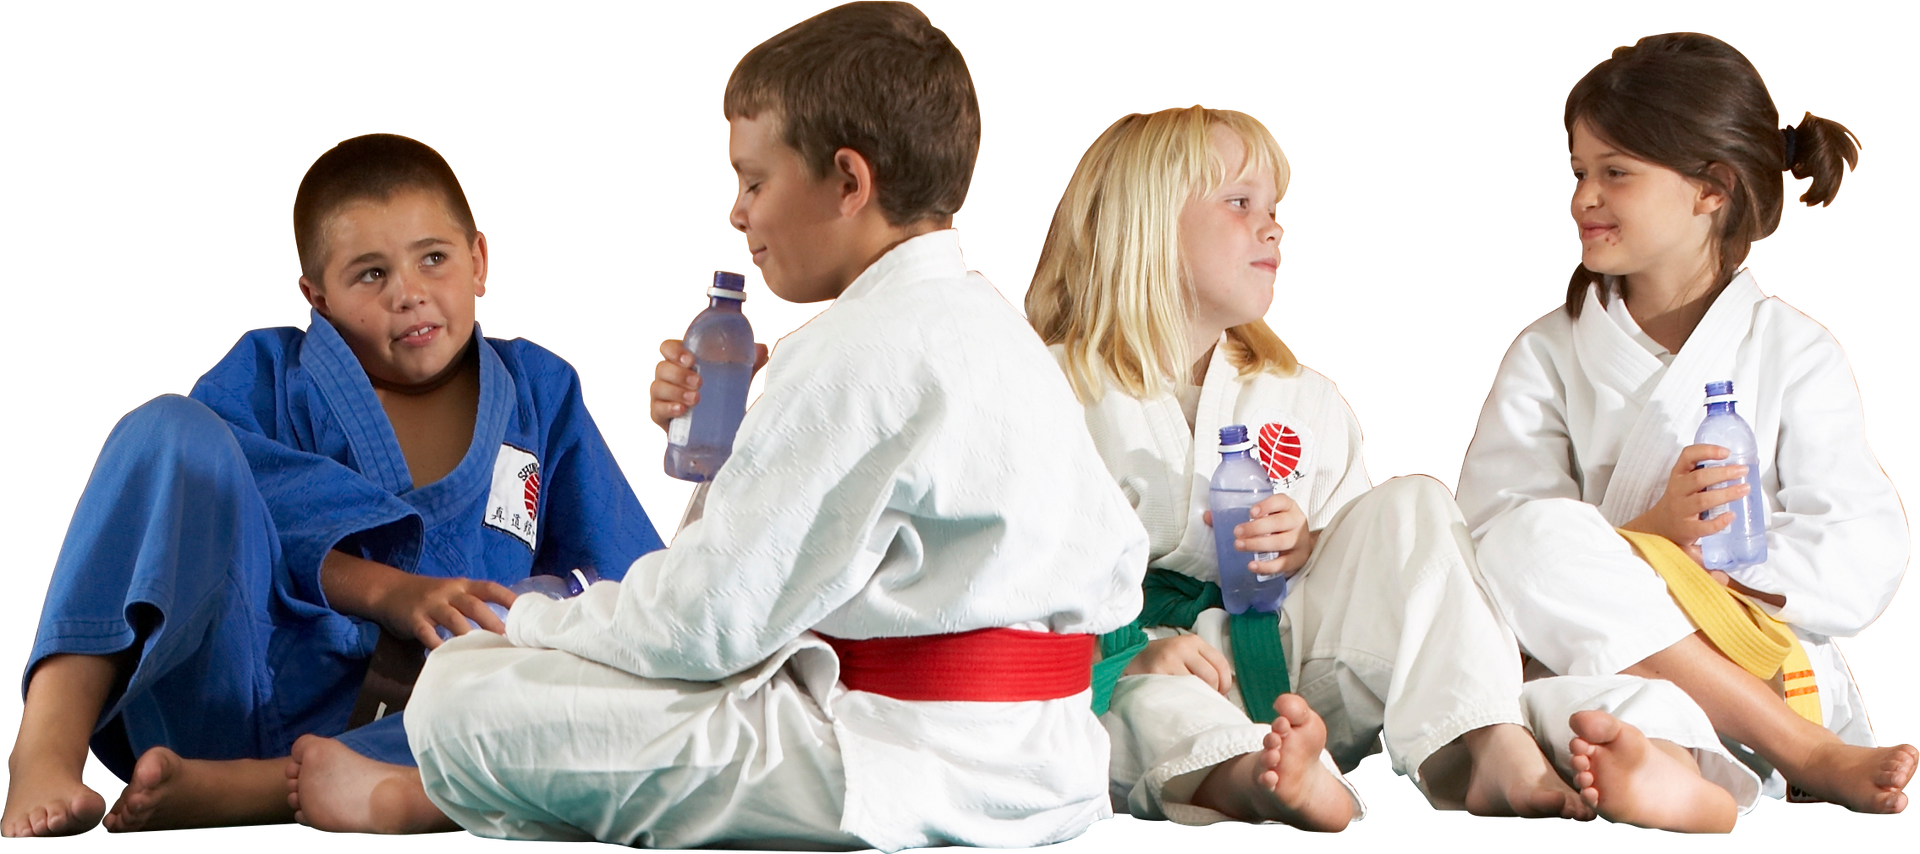 a group of children in karate uniforms are sitting on the floor drinking water .